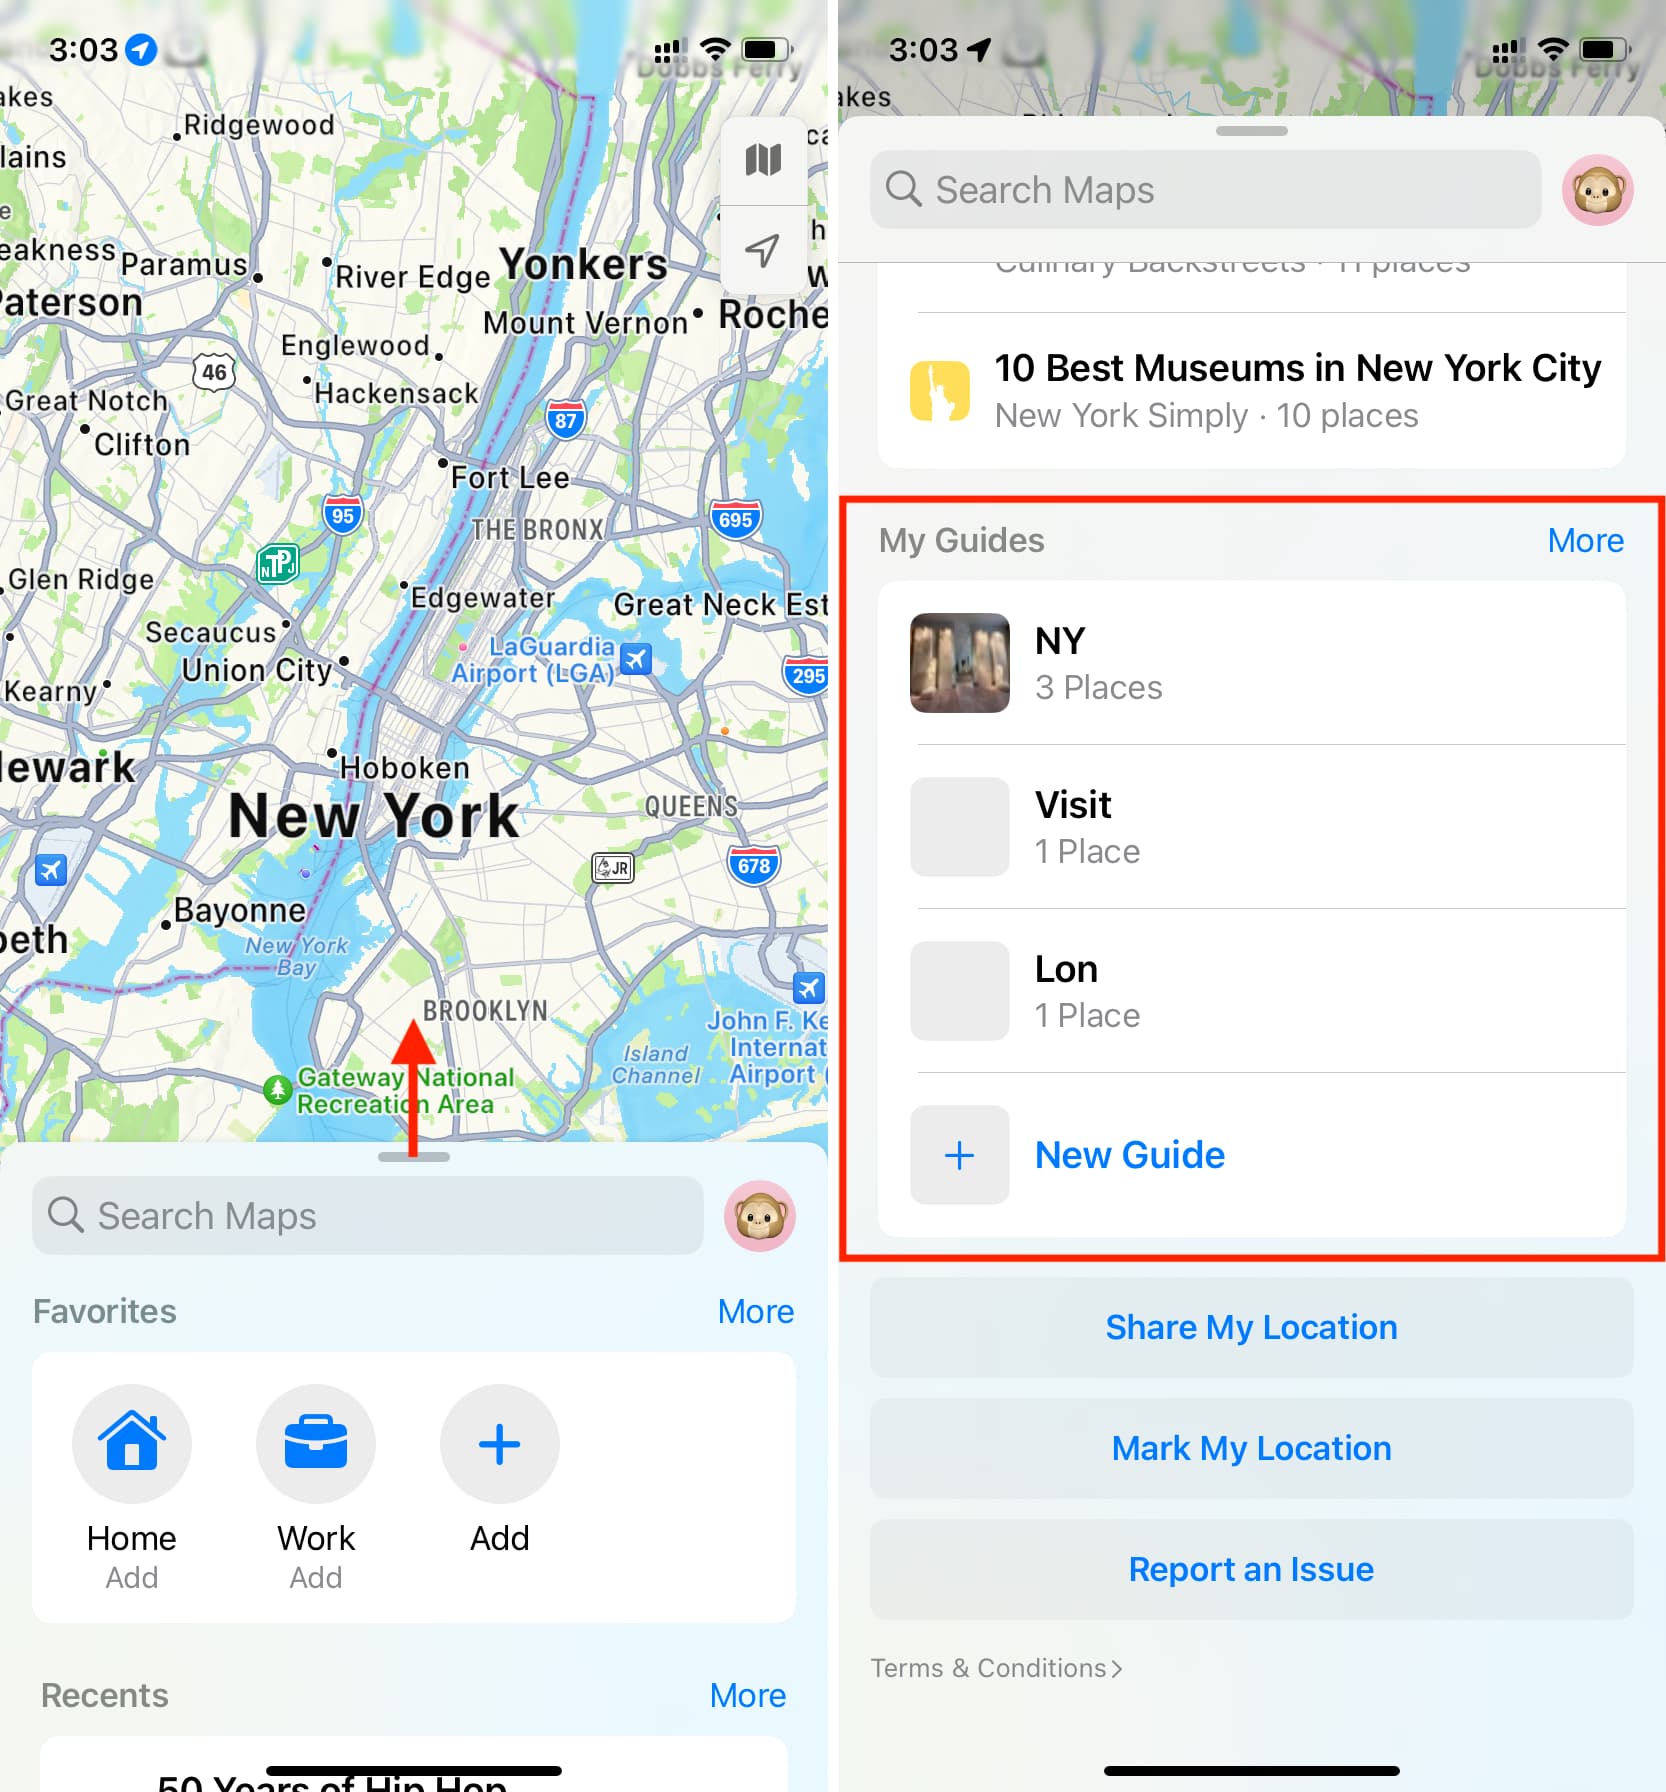 Access My Guides in Apple Maps on iPhone